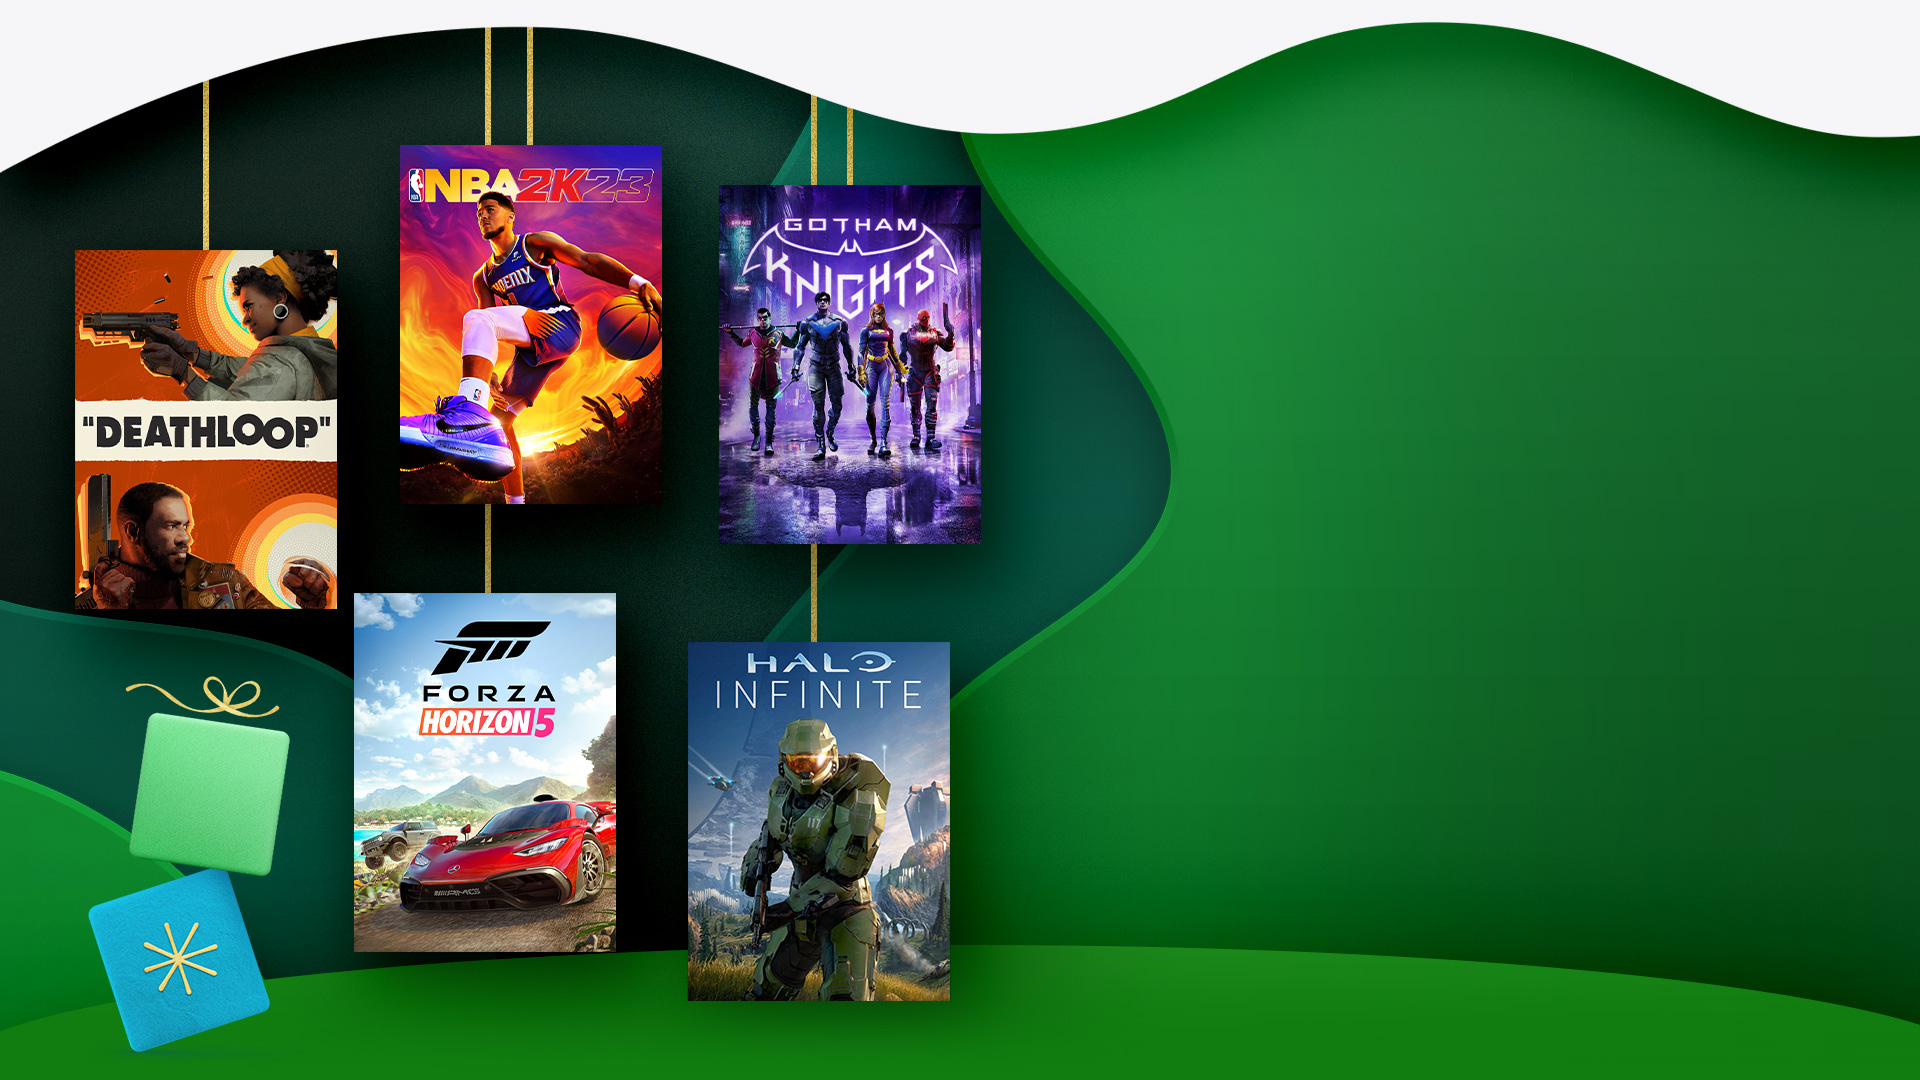 A collection of games available in the Xbox Black Friday Sale, including DEATHLOOP, NBA 2K23, and Gotham Knights. 